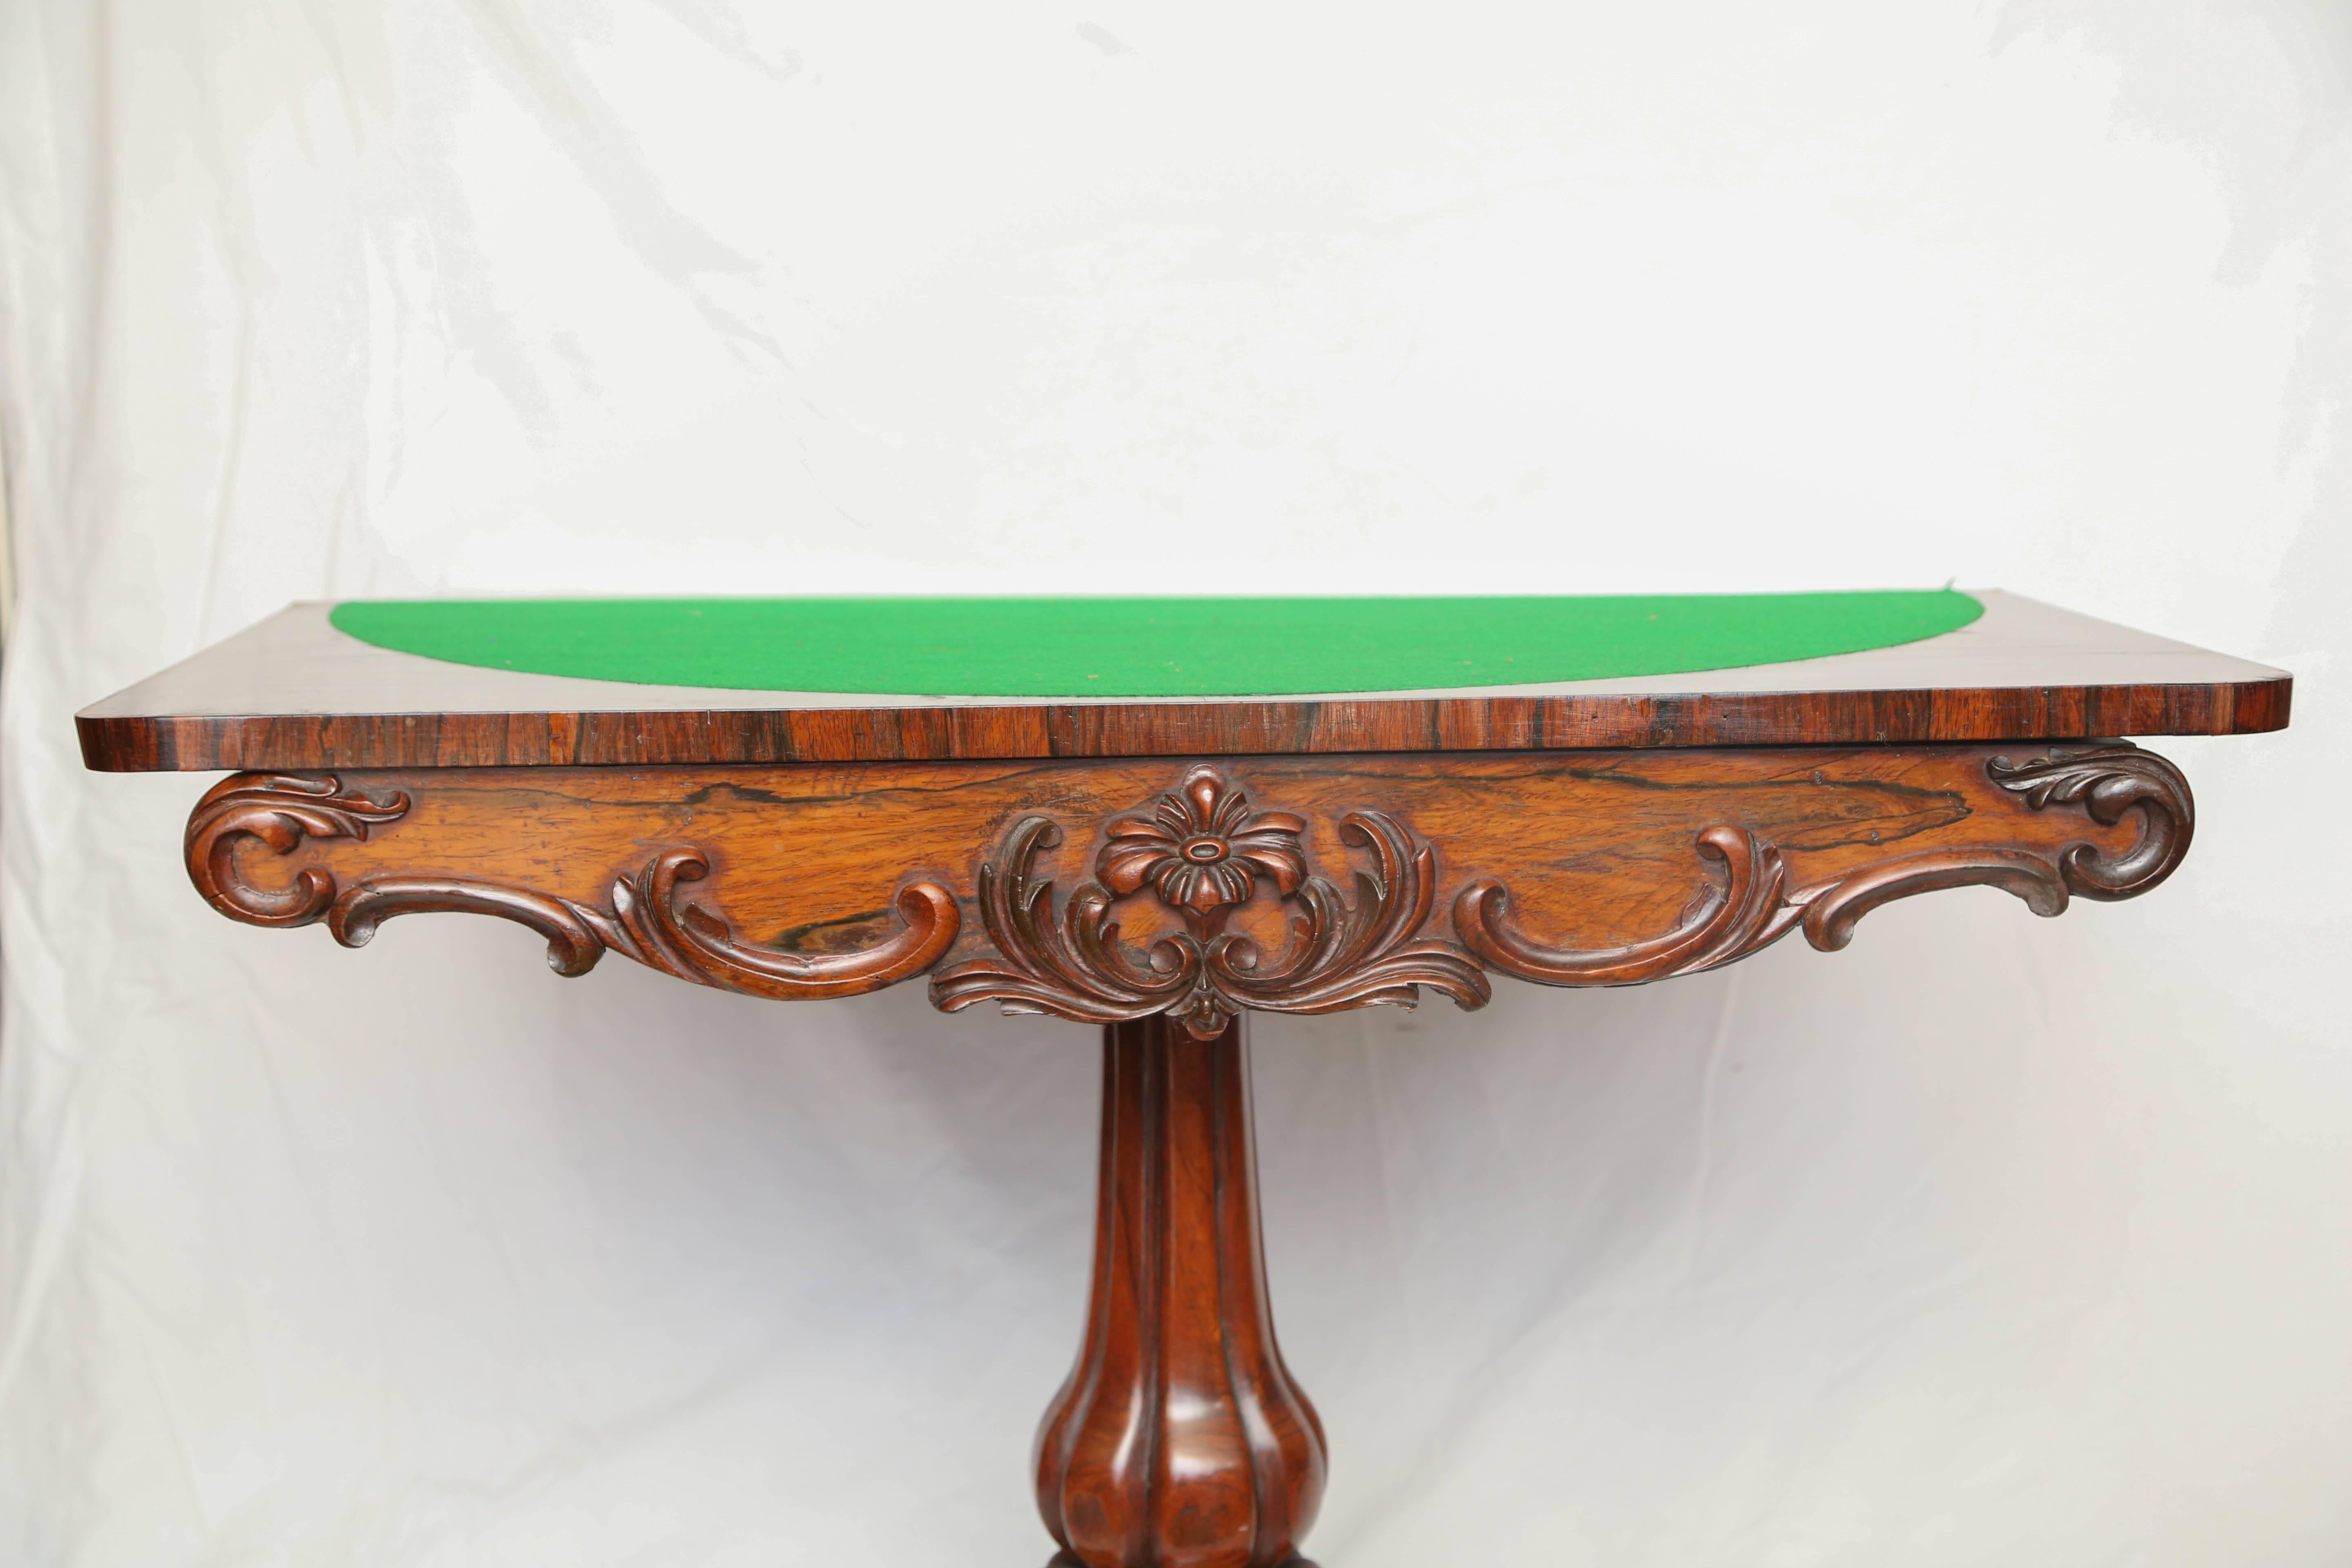 This is a very nice original fine quality rosewood game table with the original patina.
The base has lion paw feet with a large bulbous center pedestal.
To the top it opens out with the green baize to the center.
Superb quality carved freeze to the